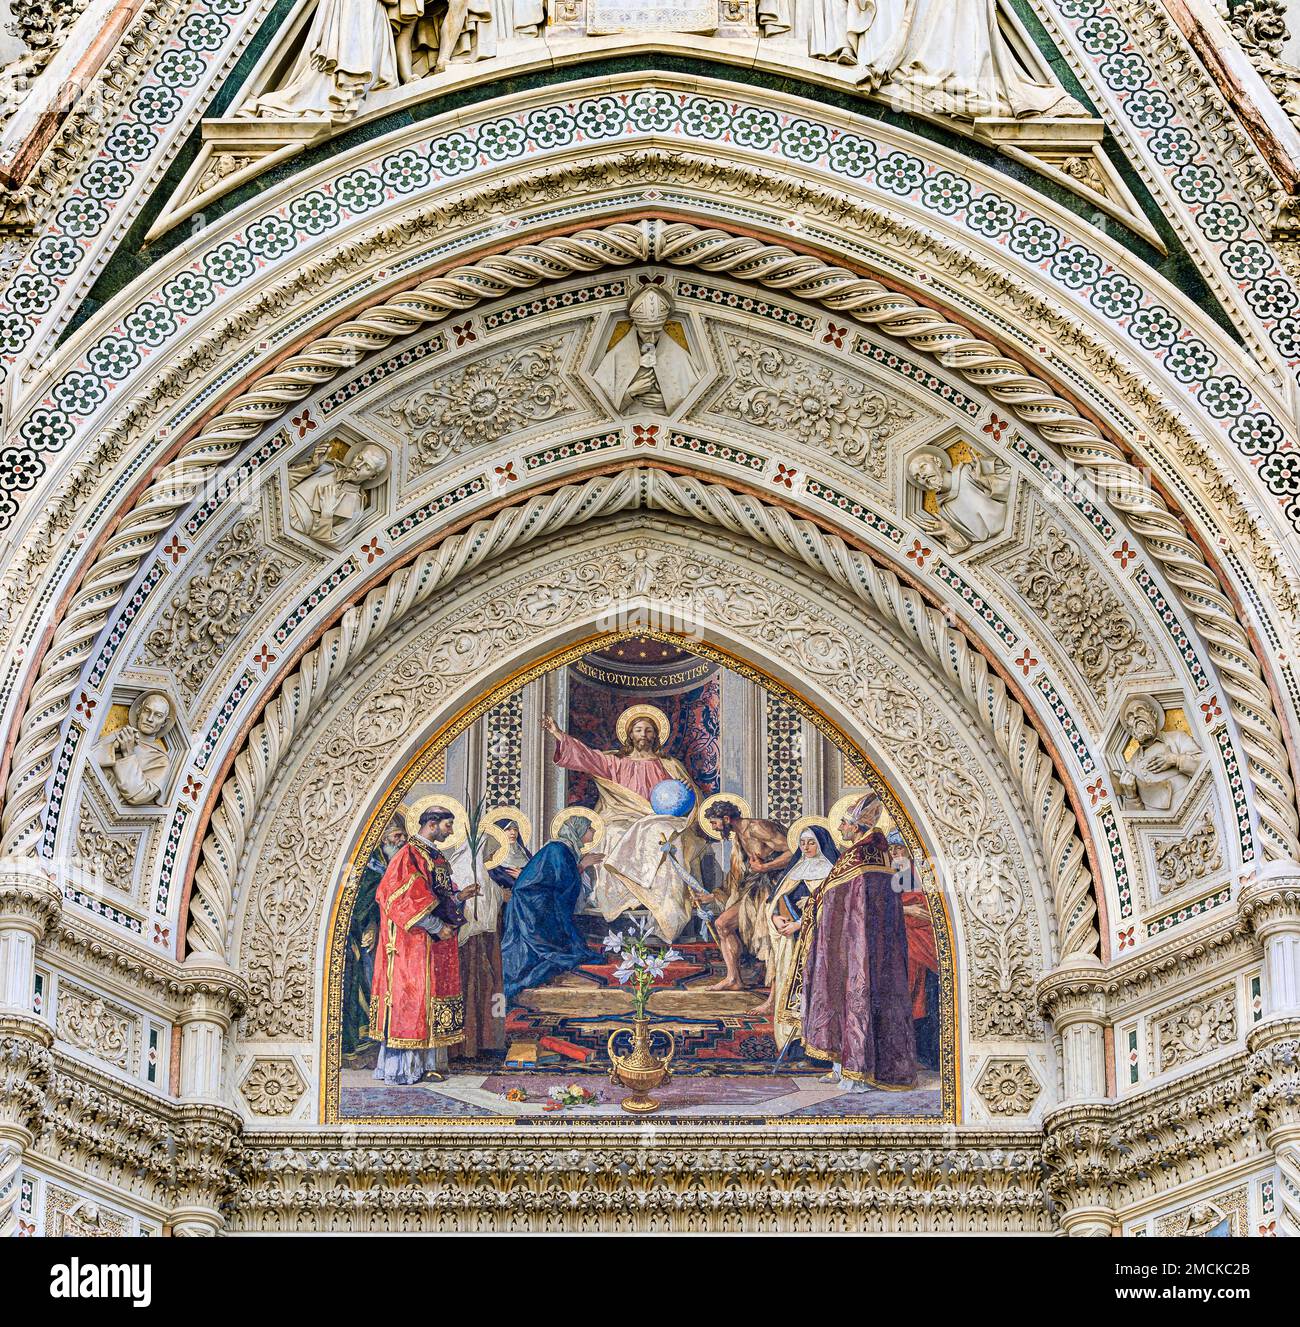 Central tympanum mosaic of Jesus Christ at the Duomo Cathedral or Cattedrale di Santa Maria del Fiore, Florence, Italy known for the Brunelleschi dome Stock Photo